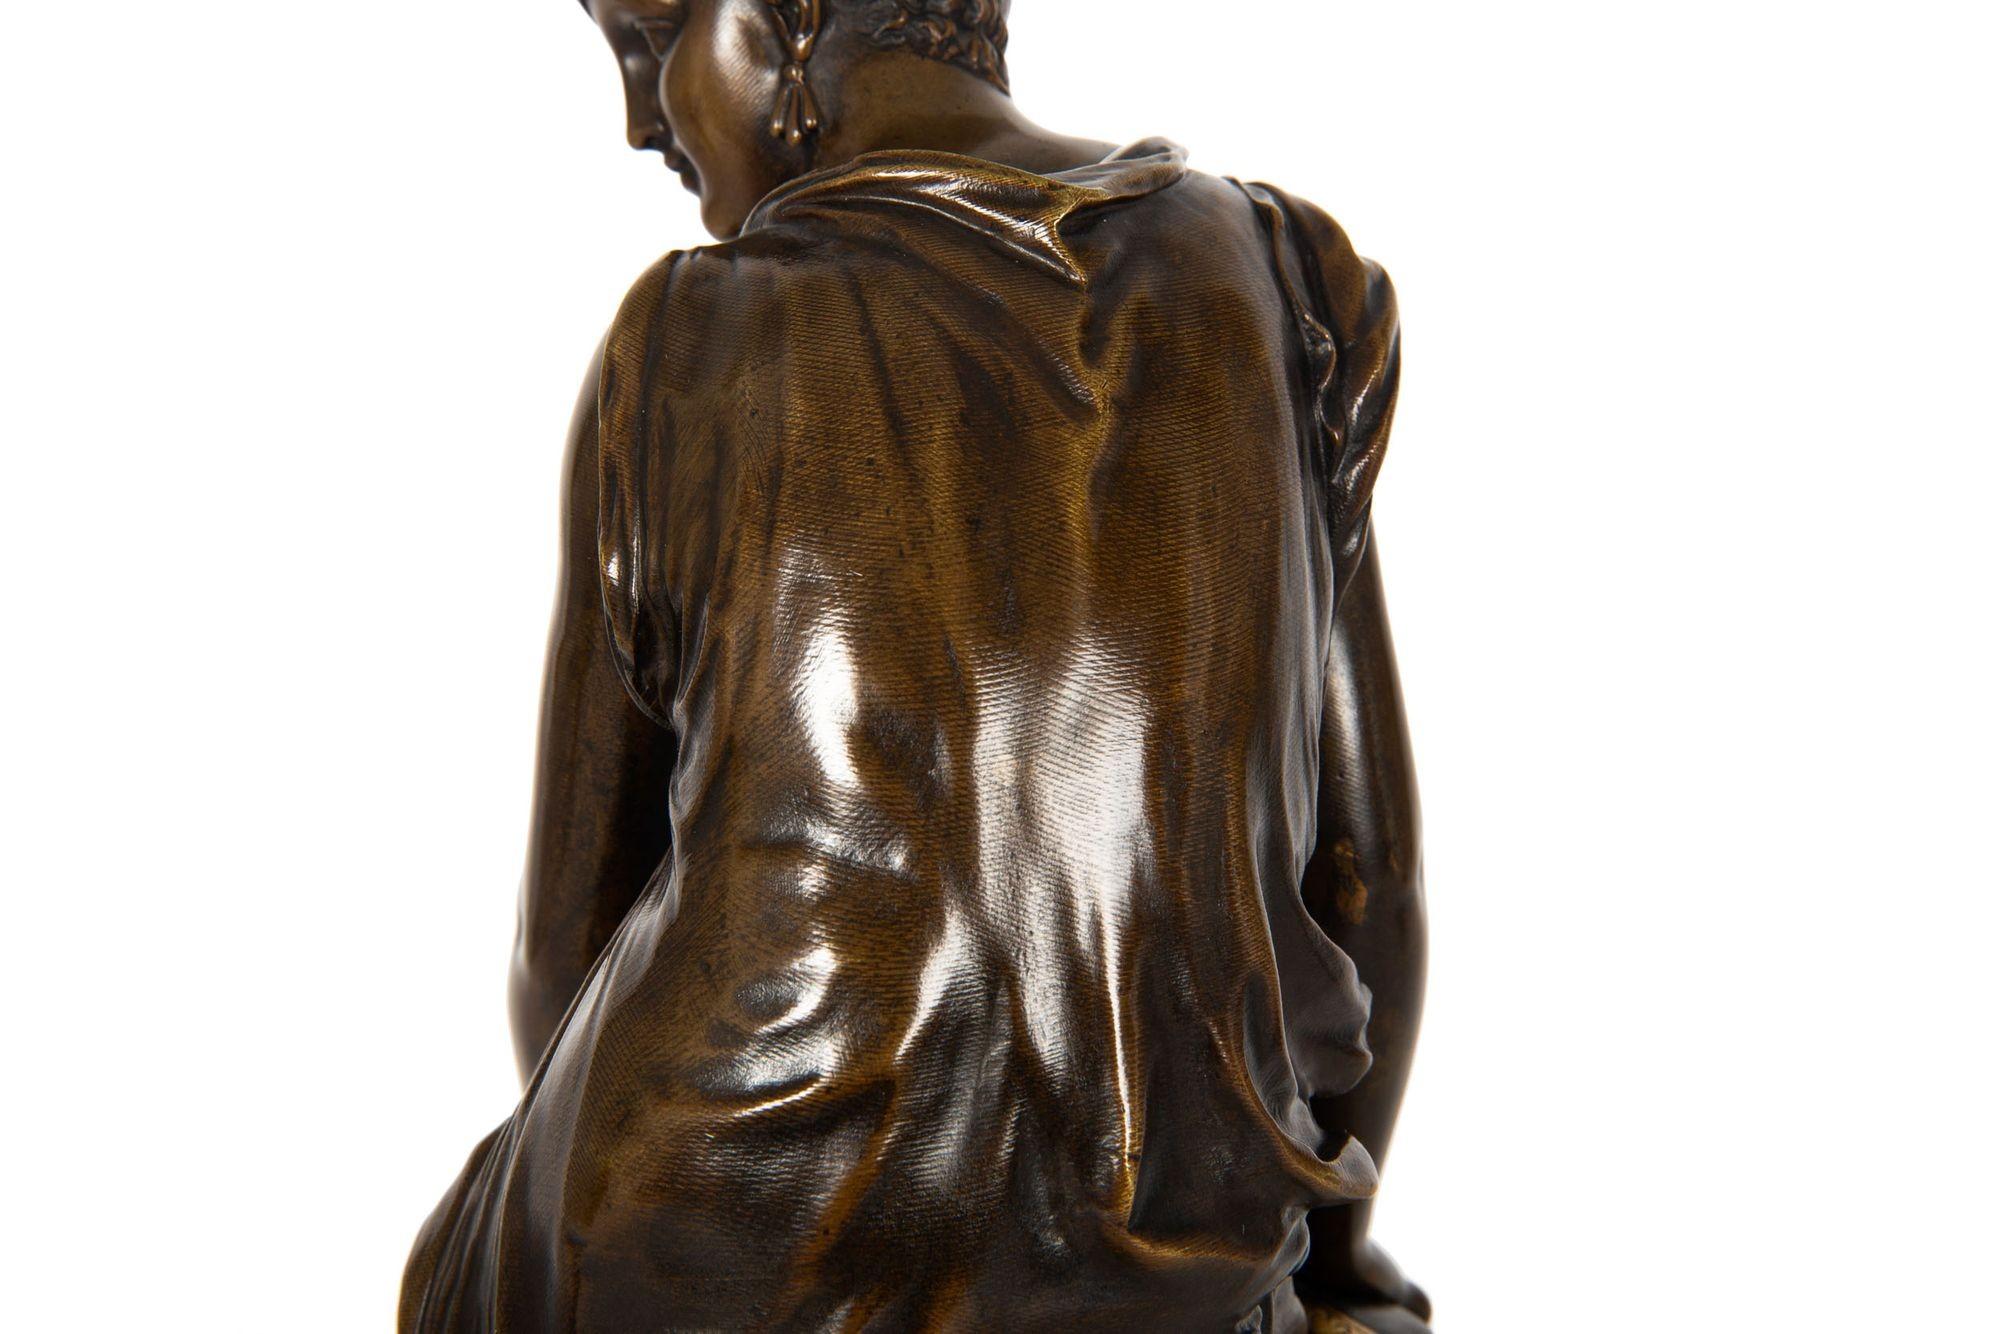 French Bronze Sculpture Seated Woman by Etienne-Henri Dumaige For Sale 8